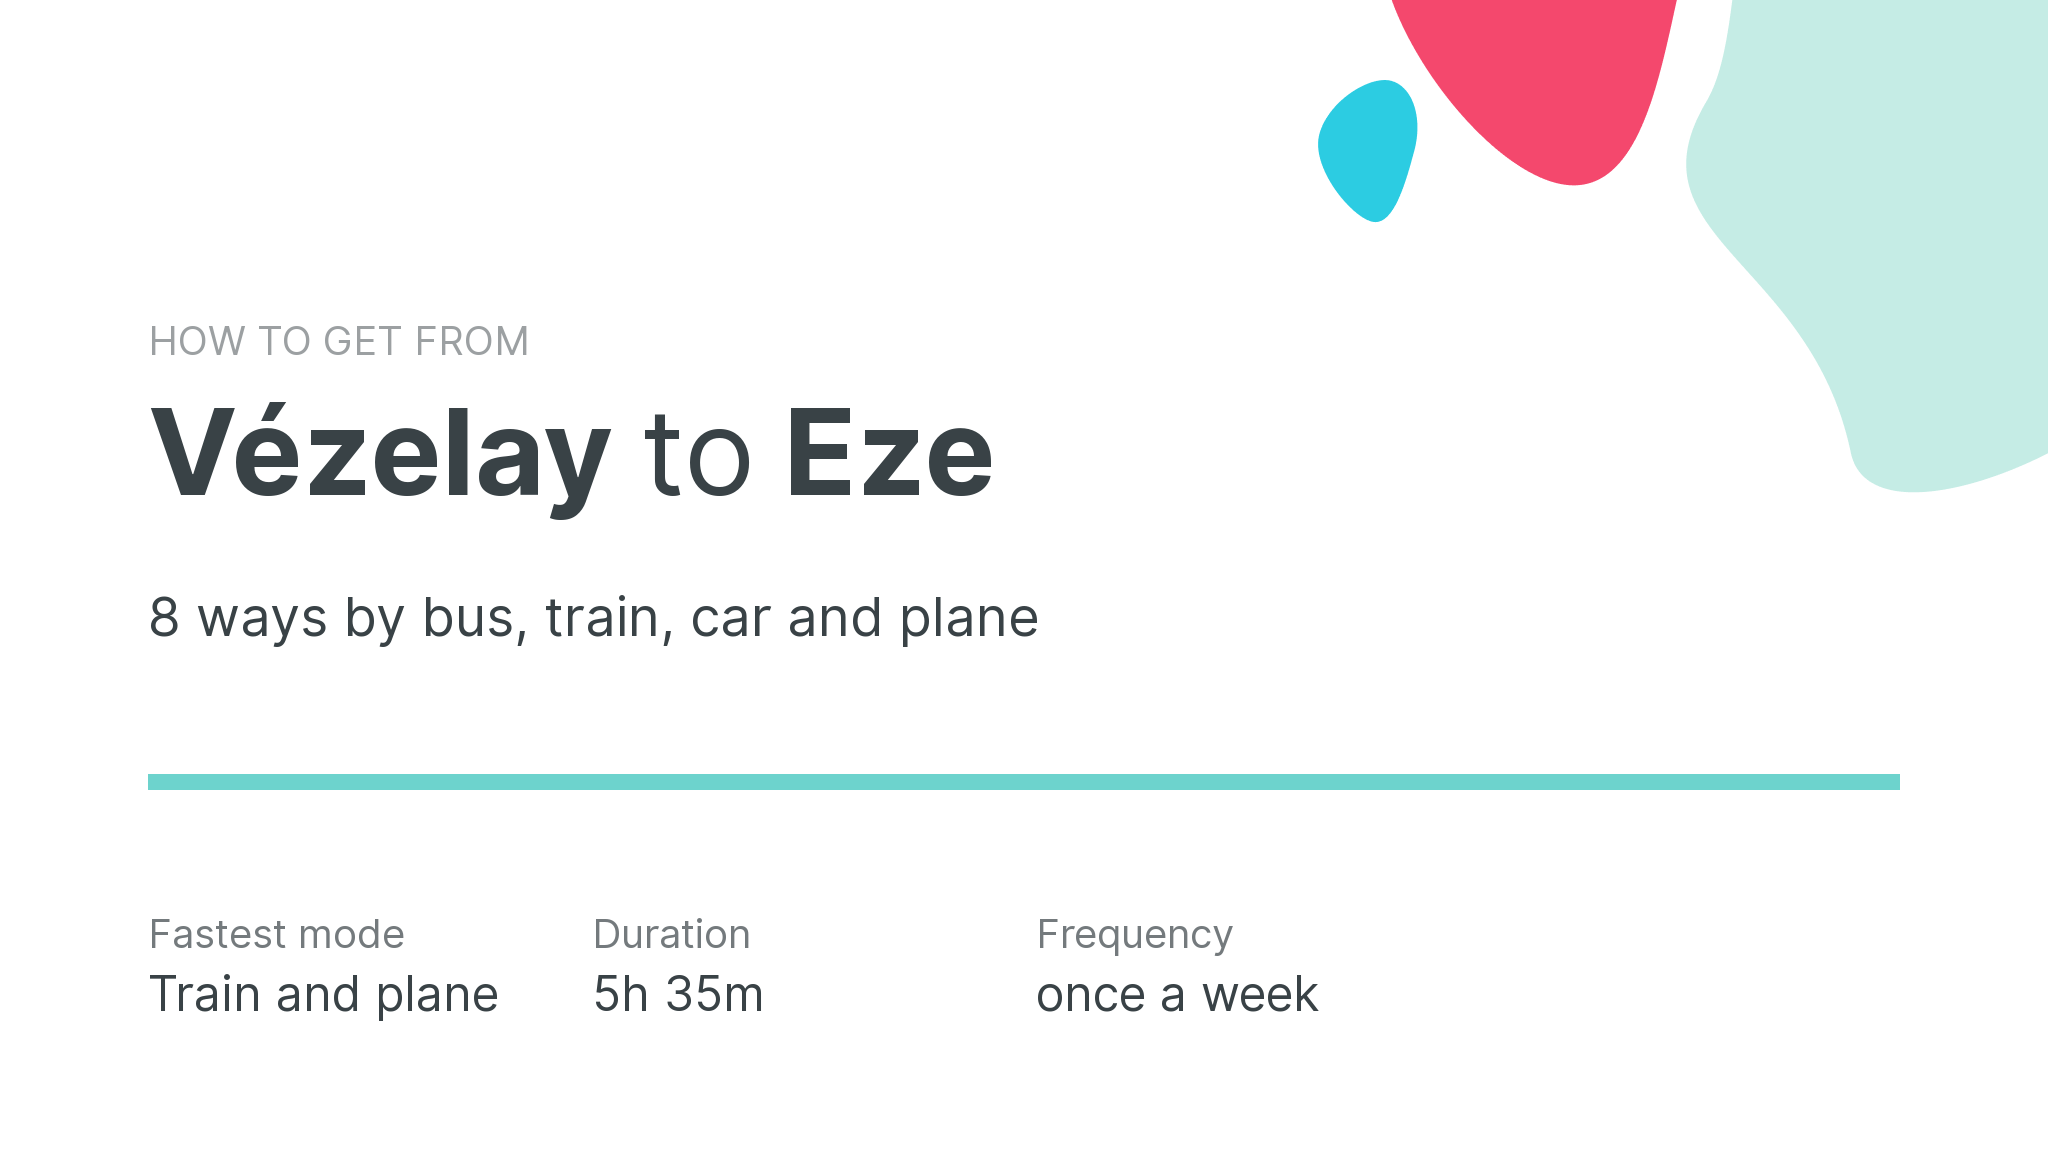 How do I get from Vézelay to Eze